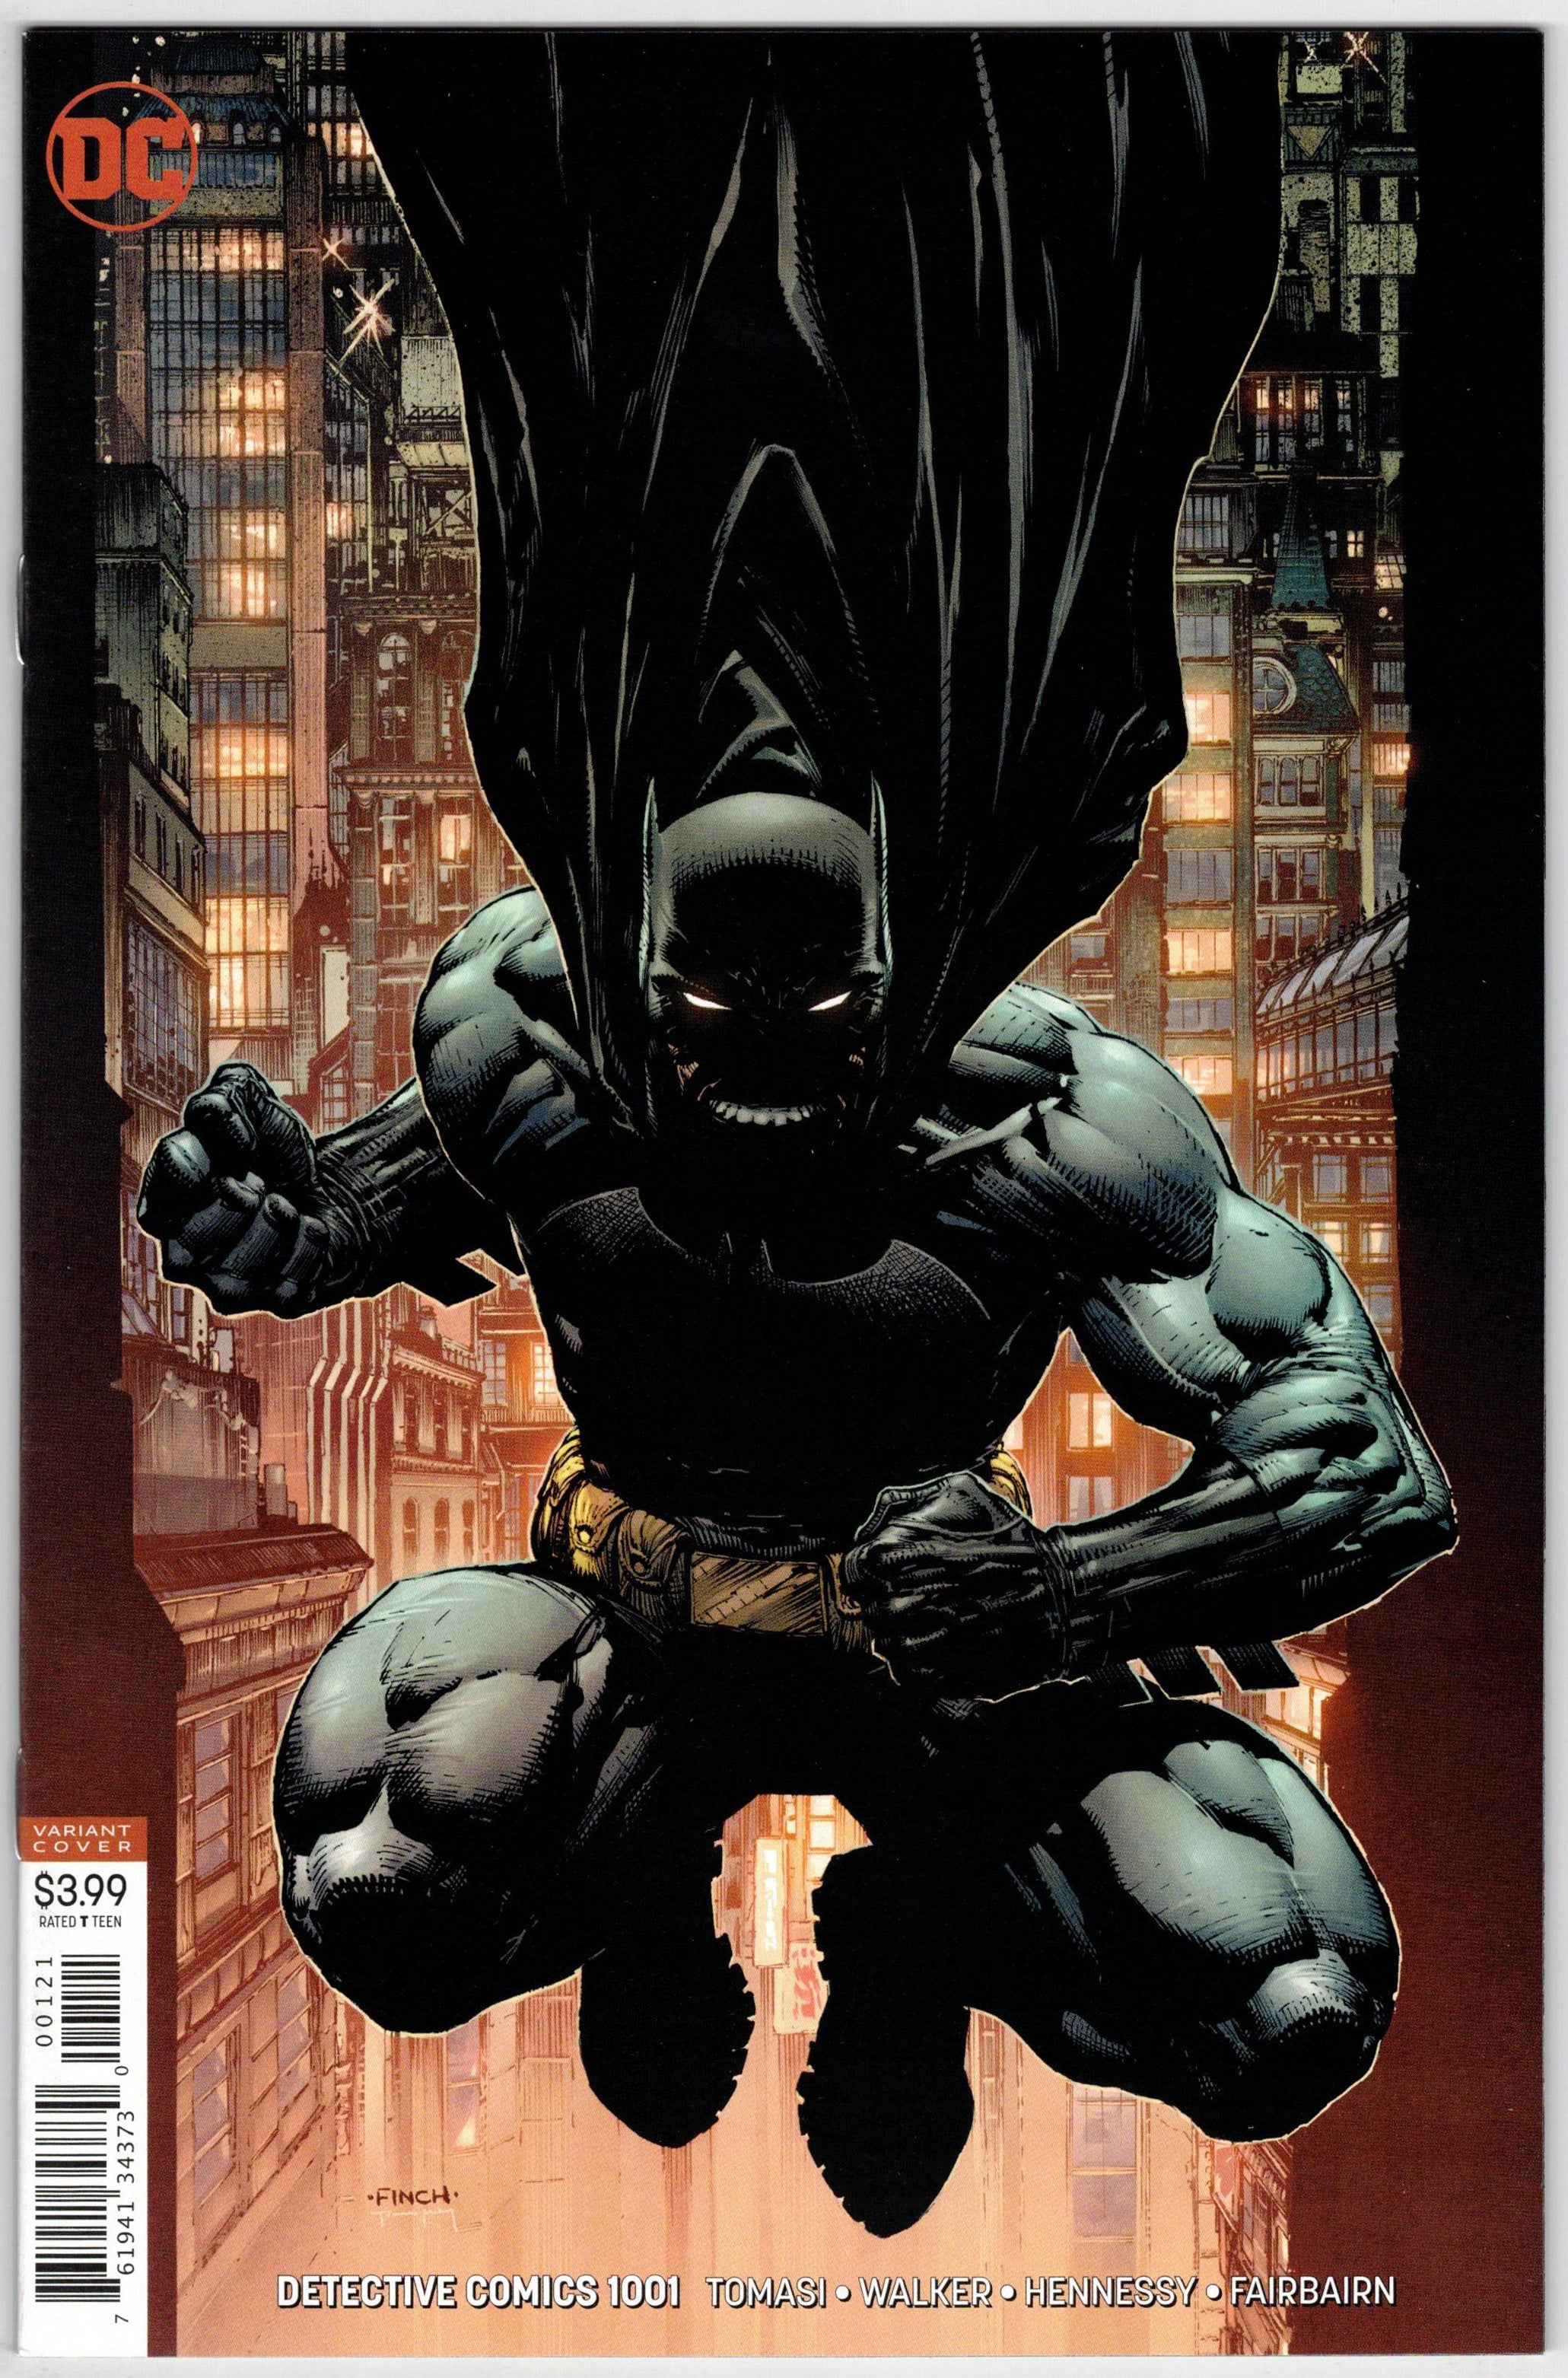 Photo of Detective Comics, Vol. 3 (2019) Issue 1001B - Near Mint Comic sold by Stronghold Collectibles